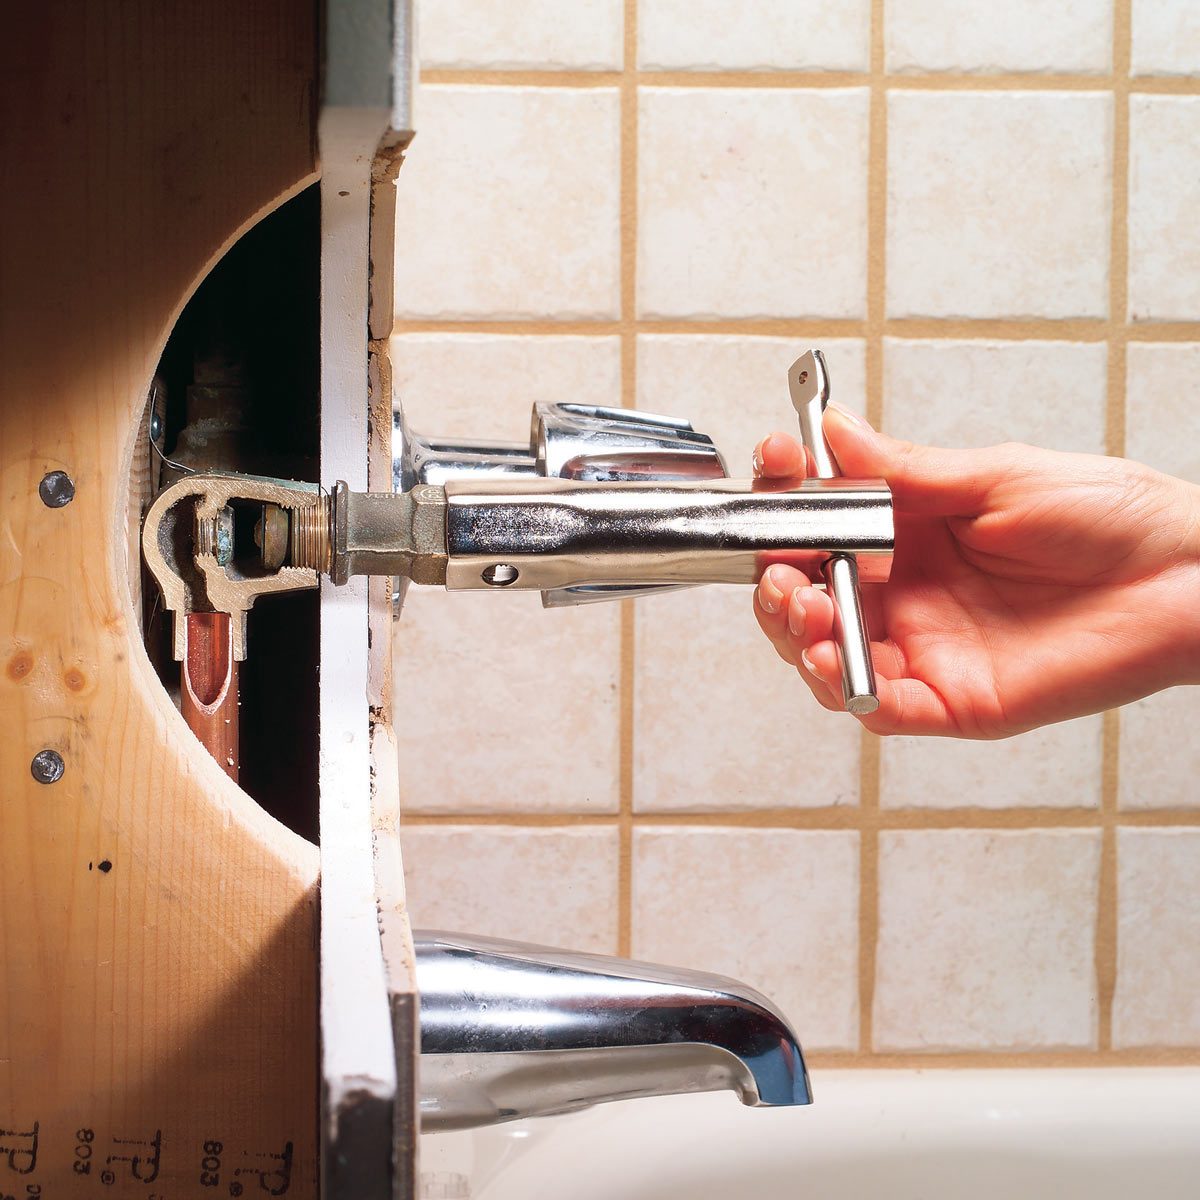 Bathtub Faucet Leaking? Here's How to Fix It